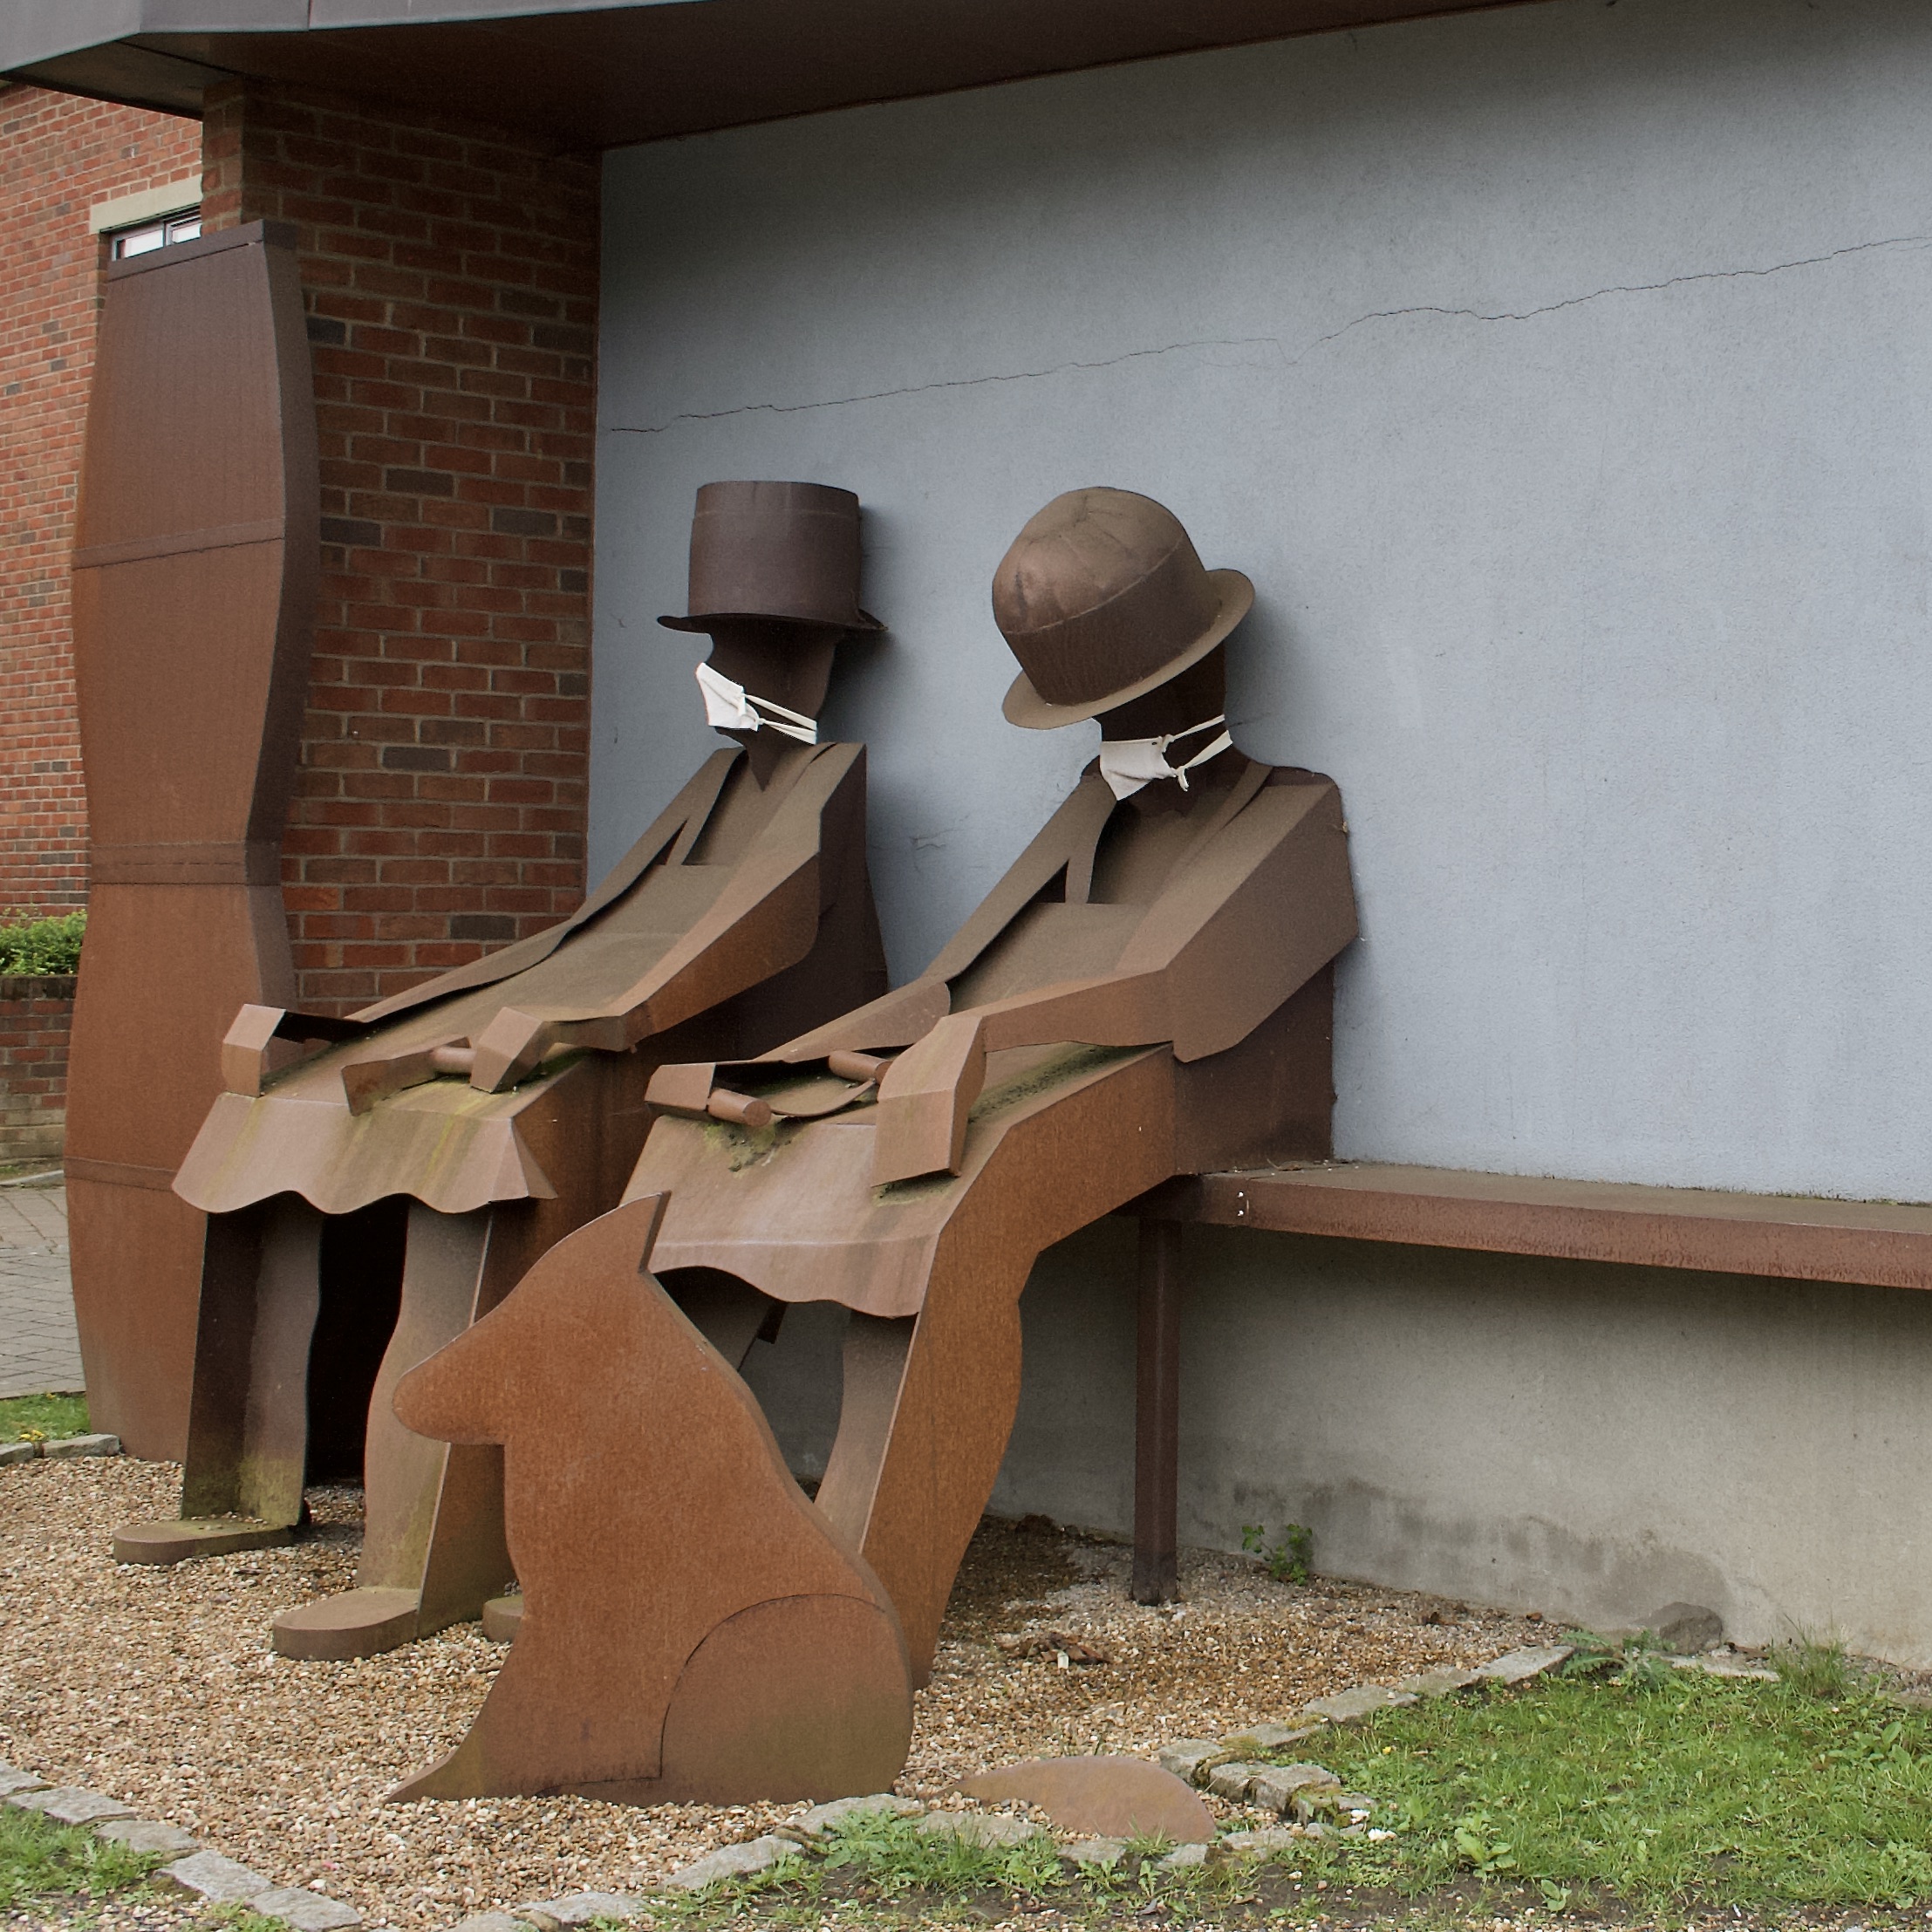 Sculpture of coopers/barrel makers in Hitchin.